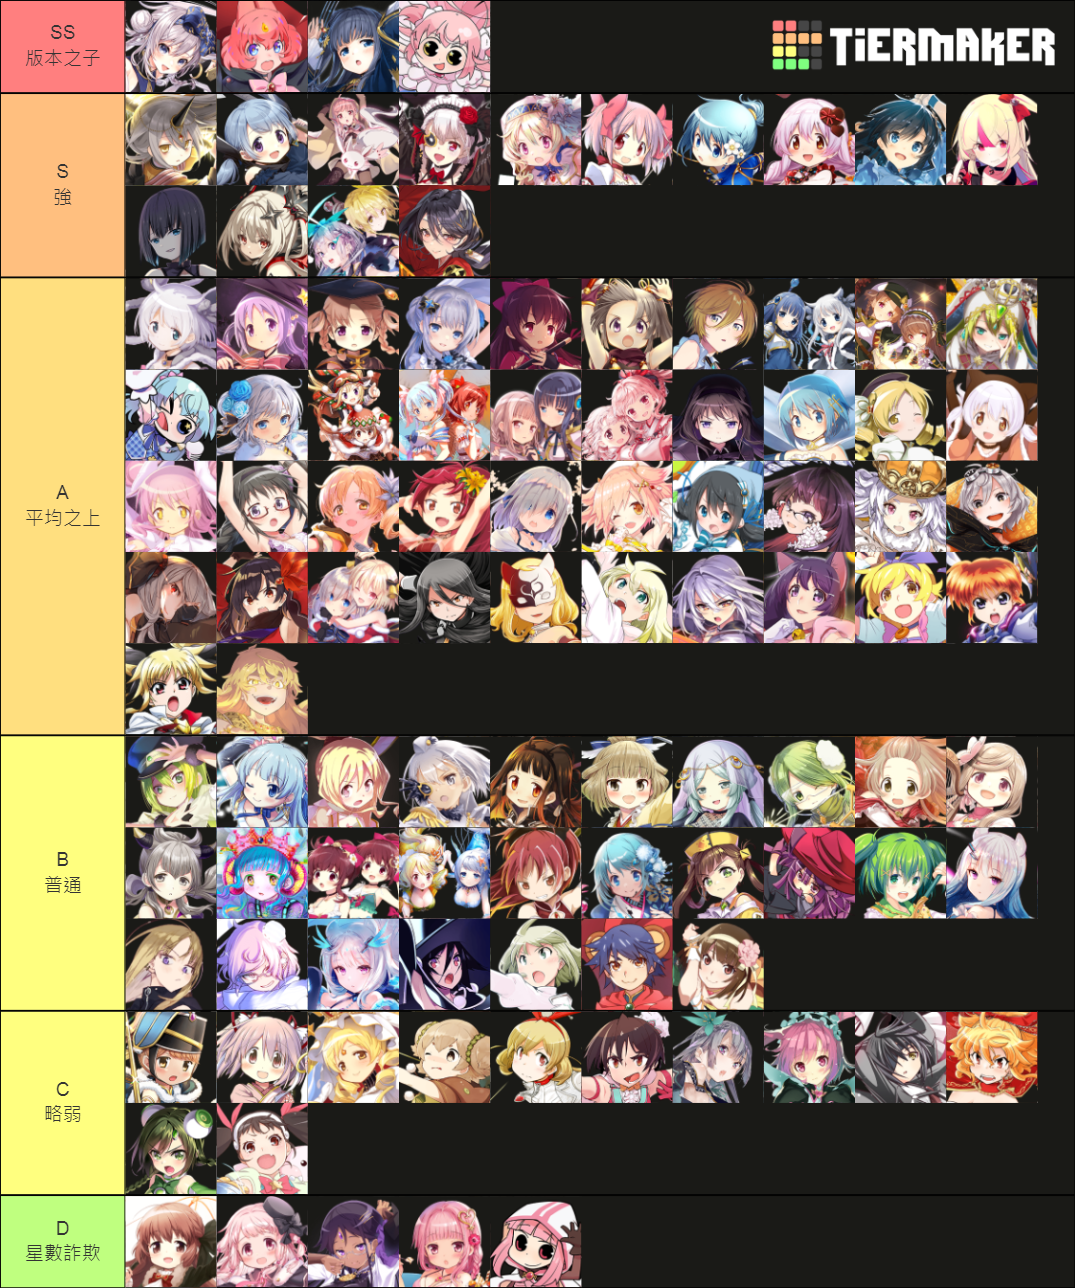 magia record ★4 Tier List (Community Rankings) - TierMaker